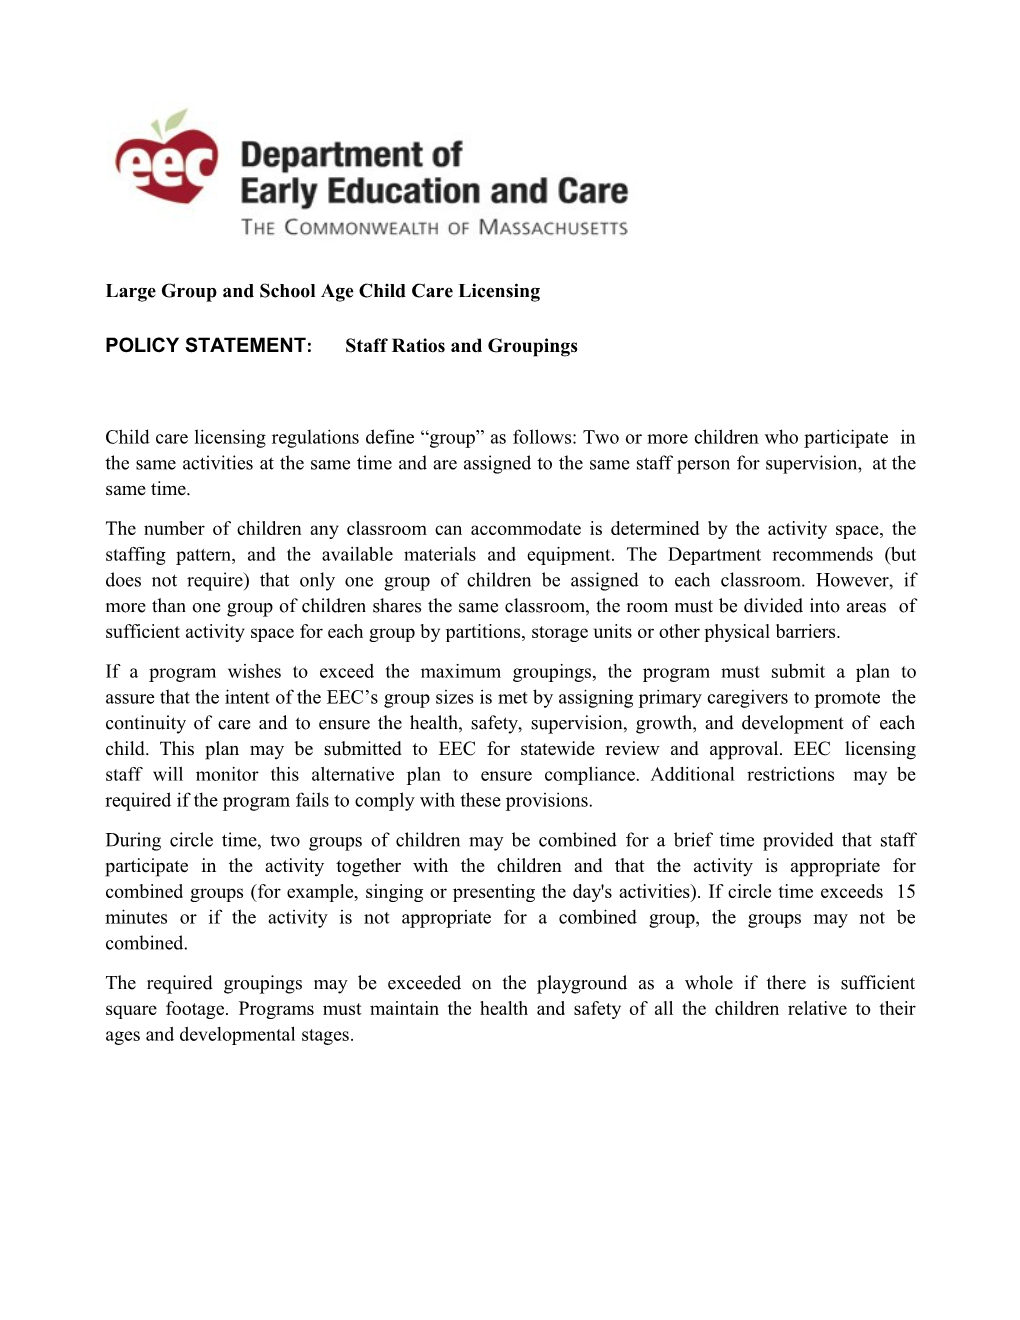 Large Groupand Schoolage Childcare Licensing